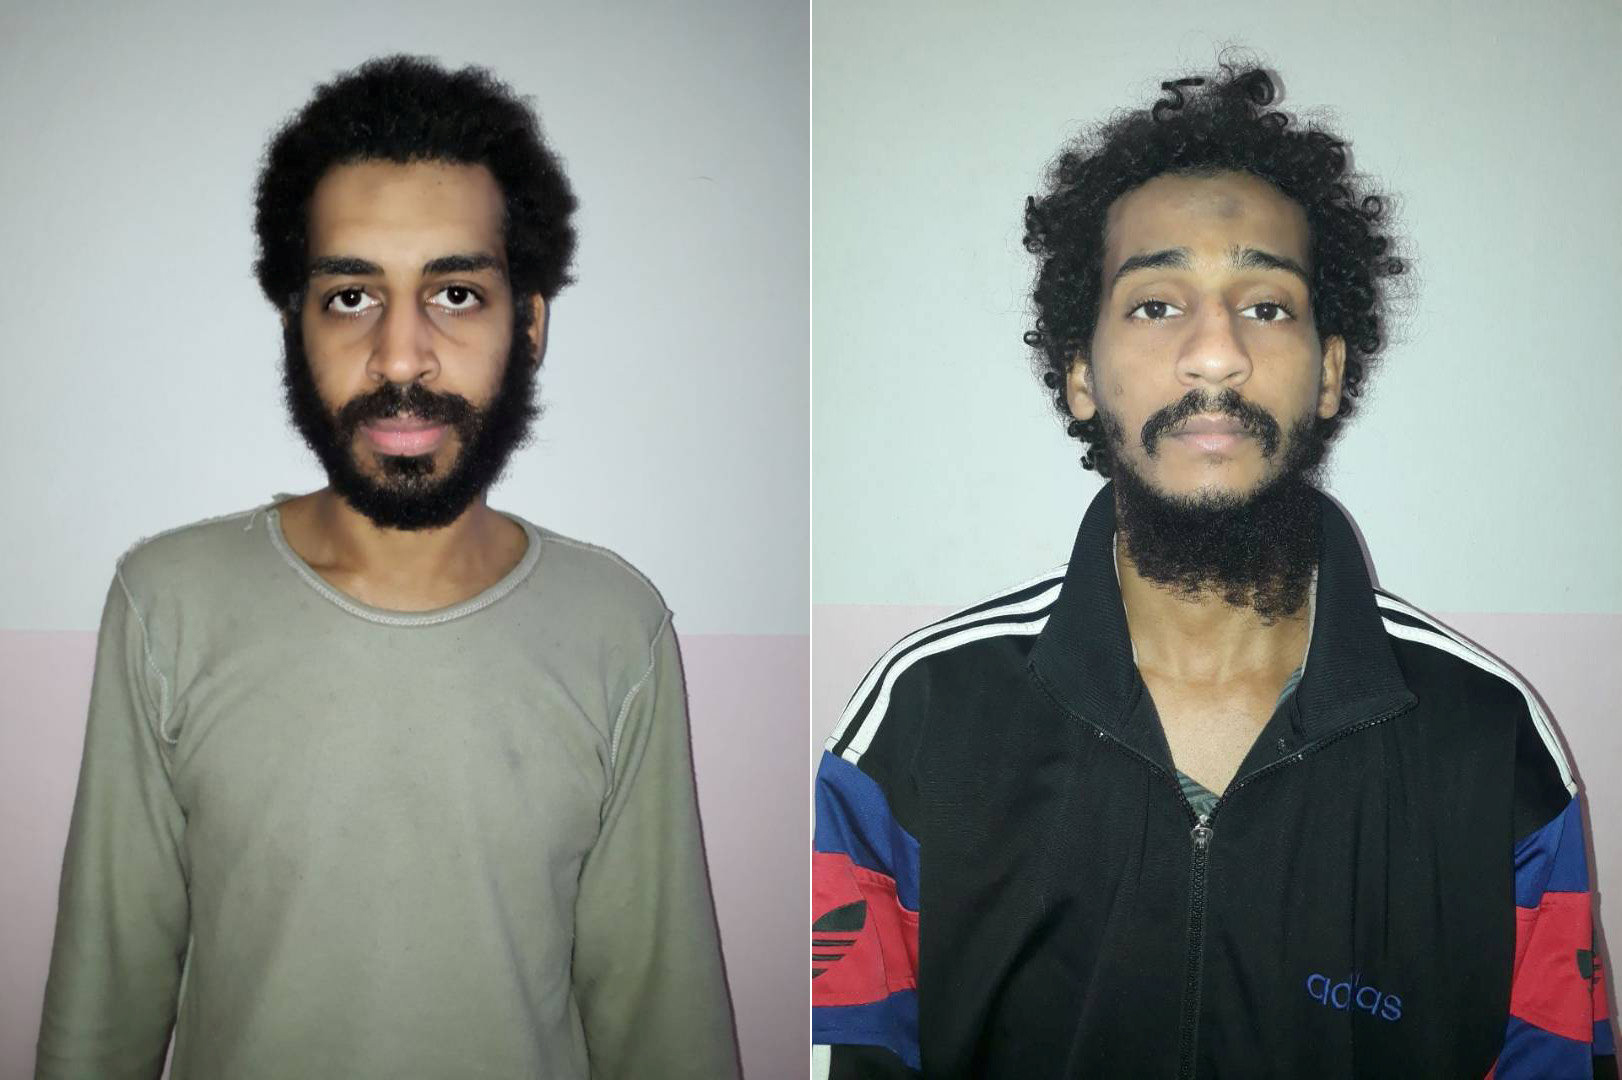 PHOTO: A combination picture shows (L-R) Alexanda Kotey and Shafee Elsheikh, who the Syrian Democratic Forces (SDF) claim are British nationals, in these undated handout pictures in Amouda, Syria released Feb. 9, 2018.